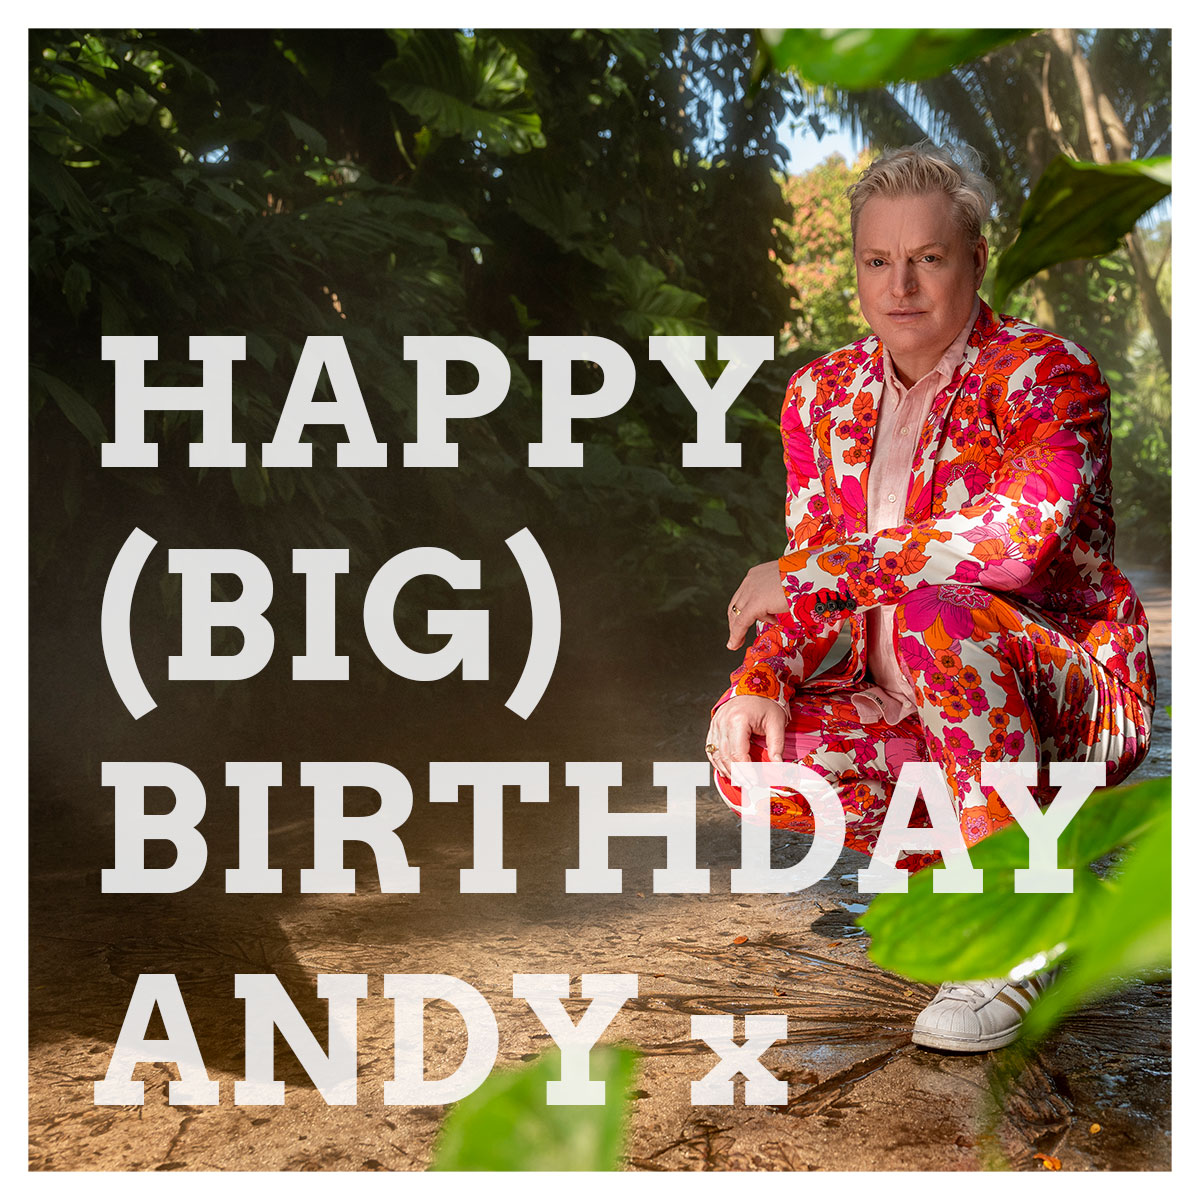 A very happy birthday today to the one and only Mr Andy Bell! ❤️